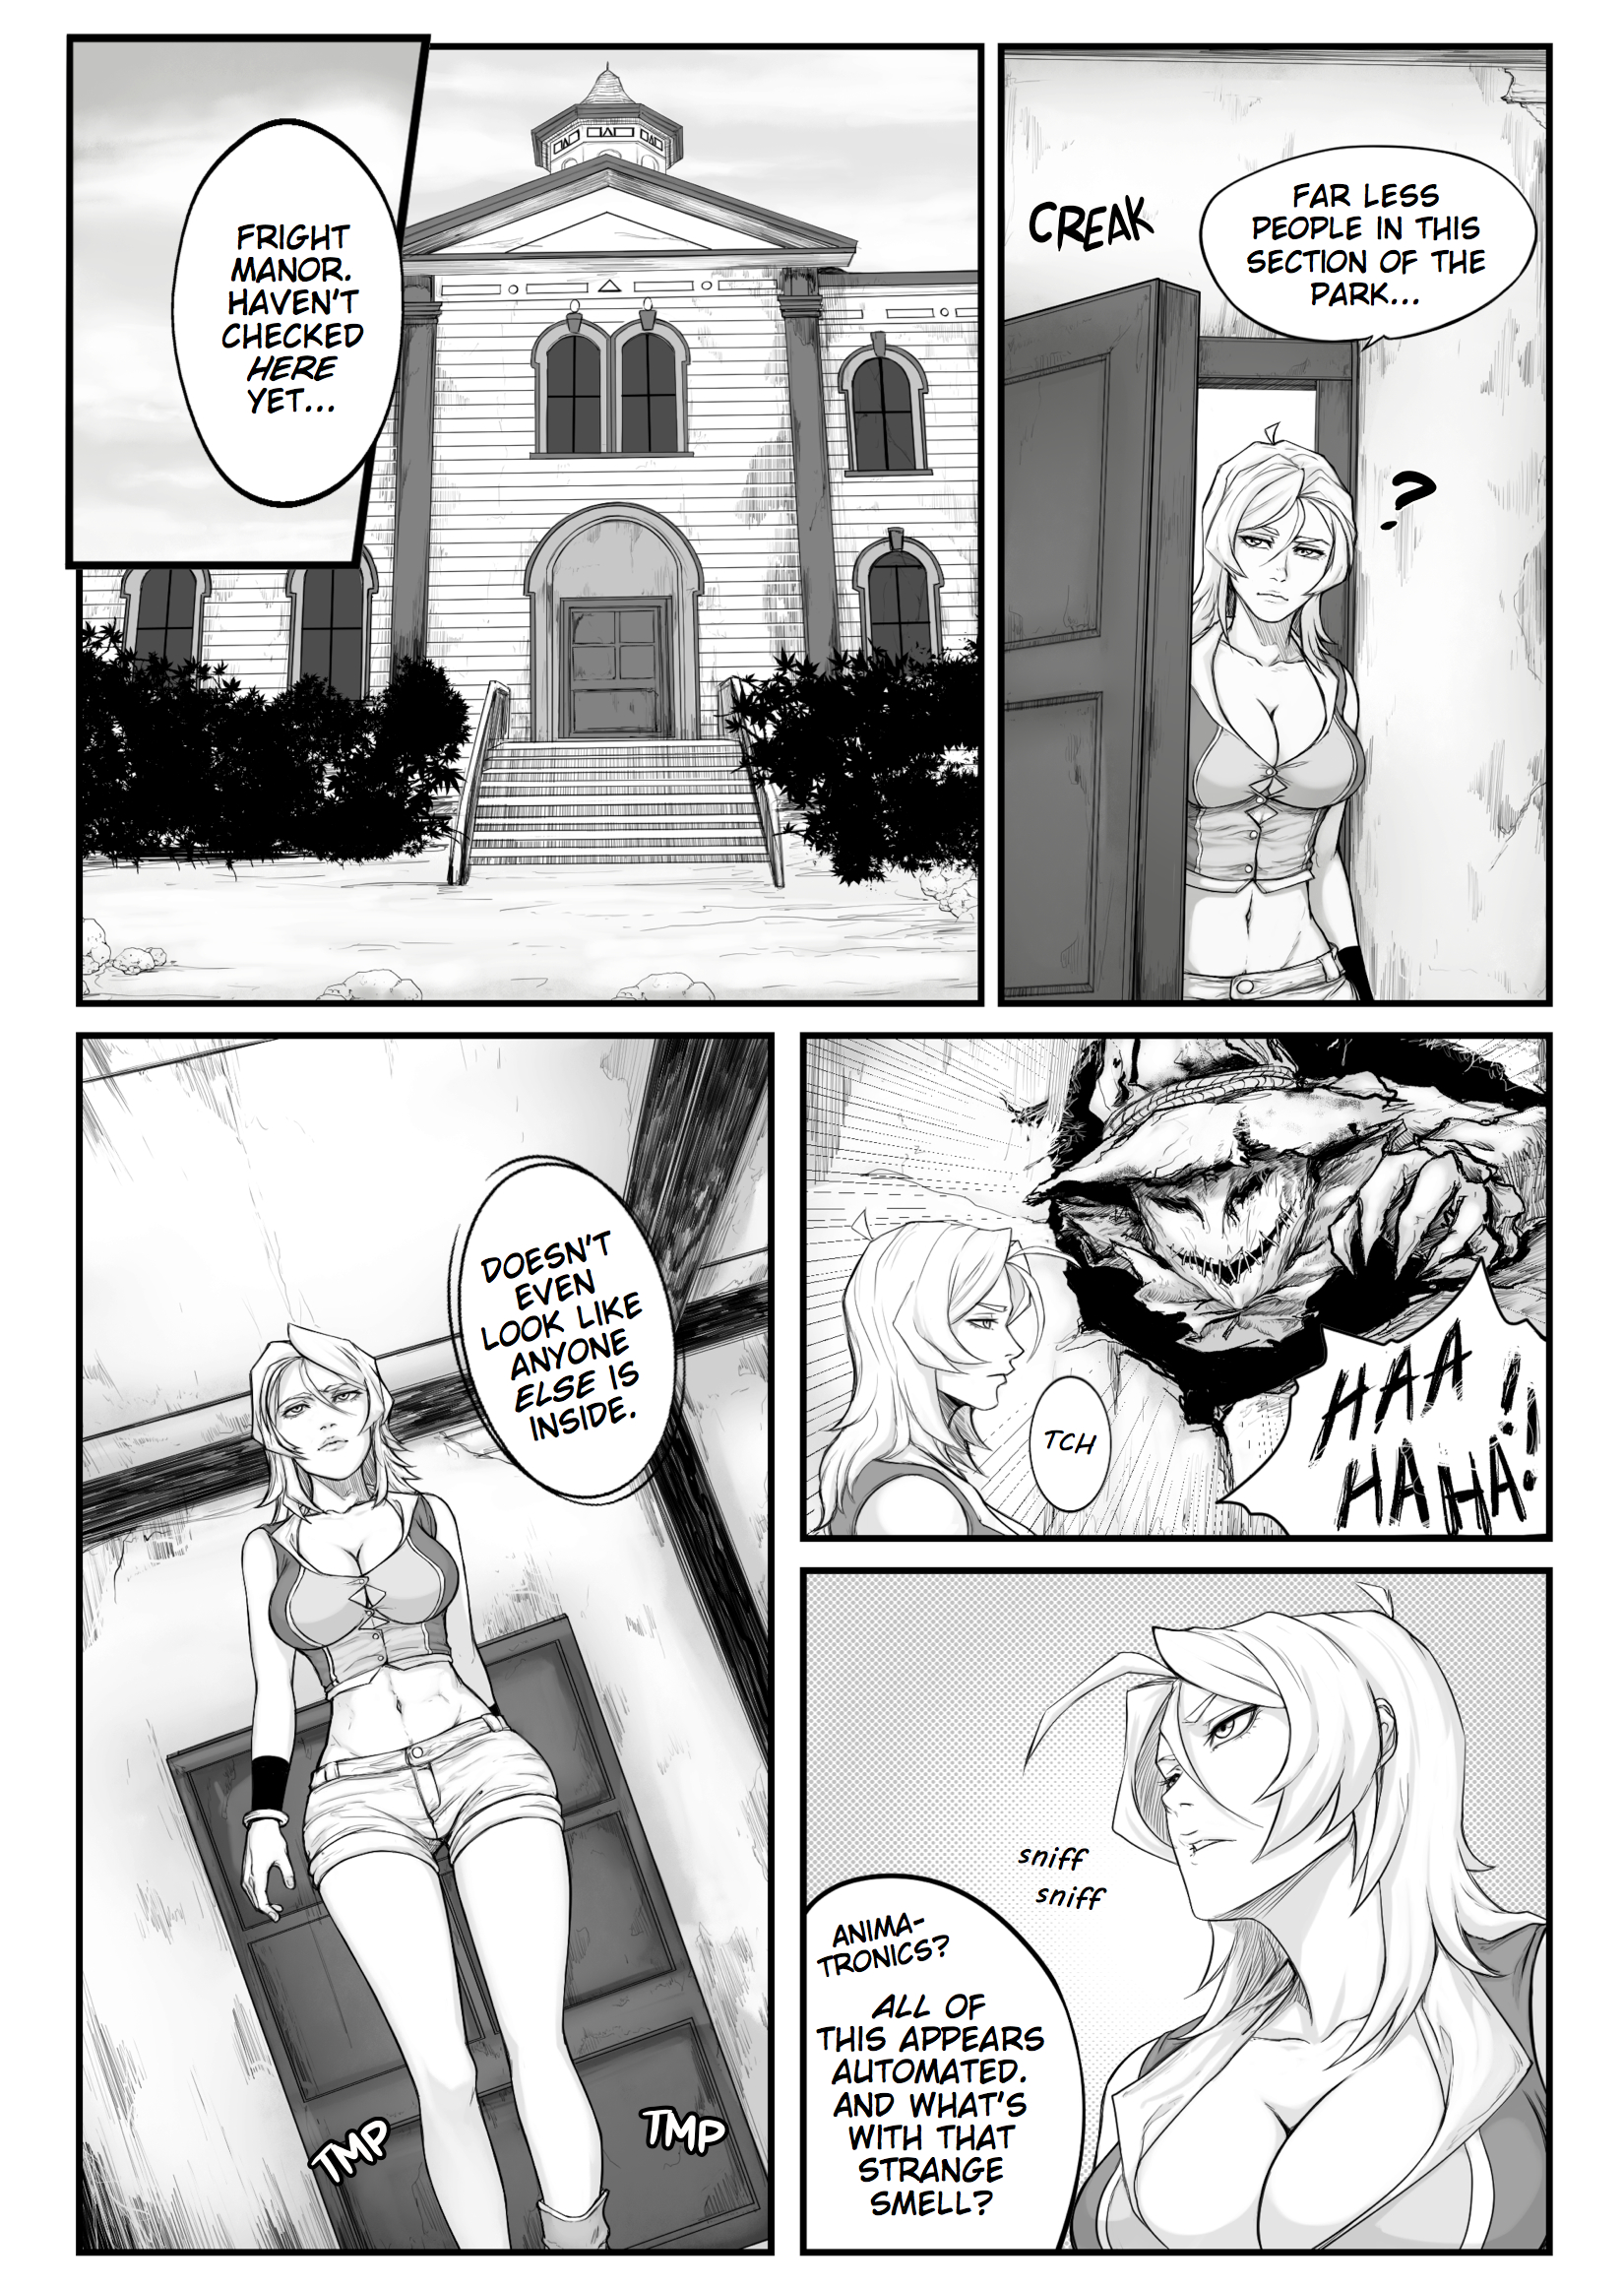 Chapter 8, Page 1